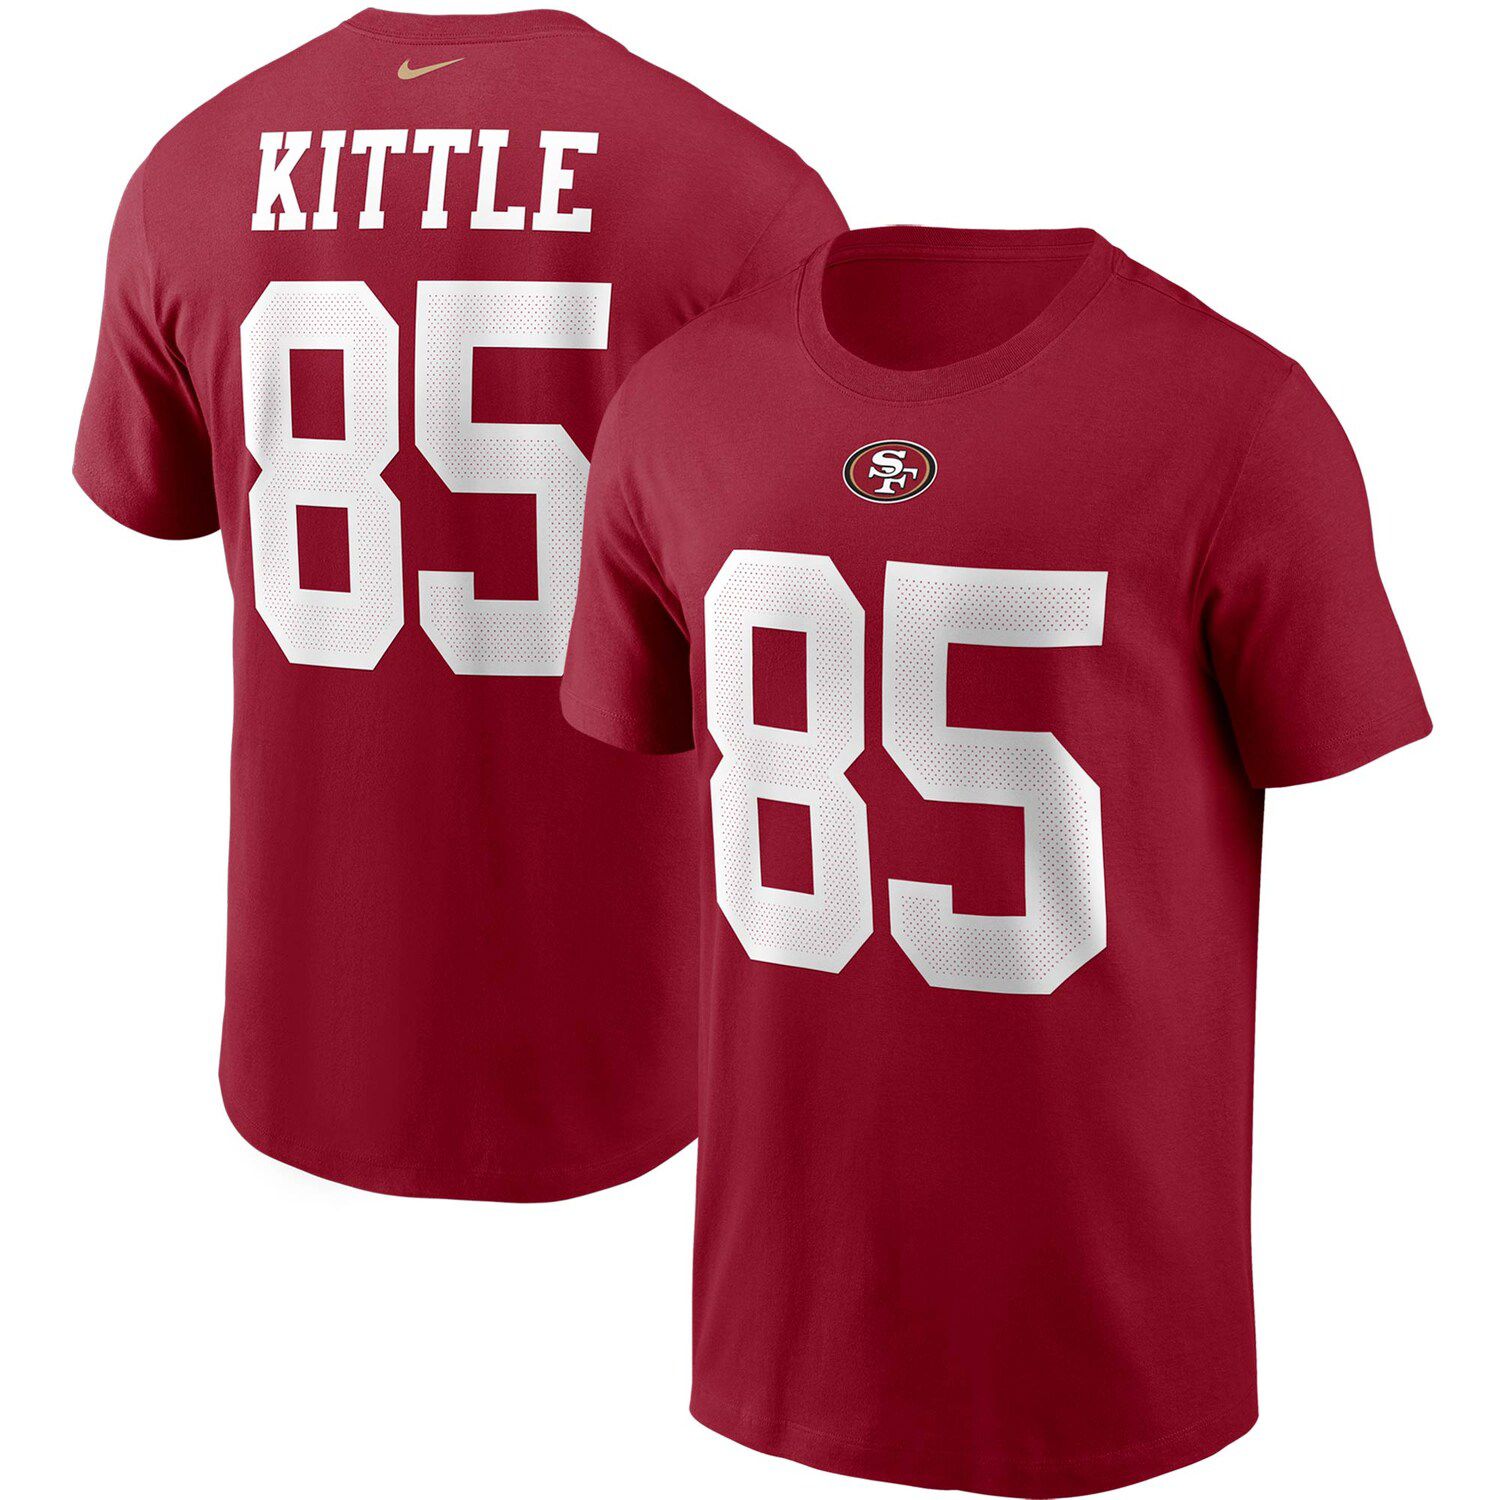 george kittle t shirt jersey